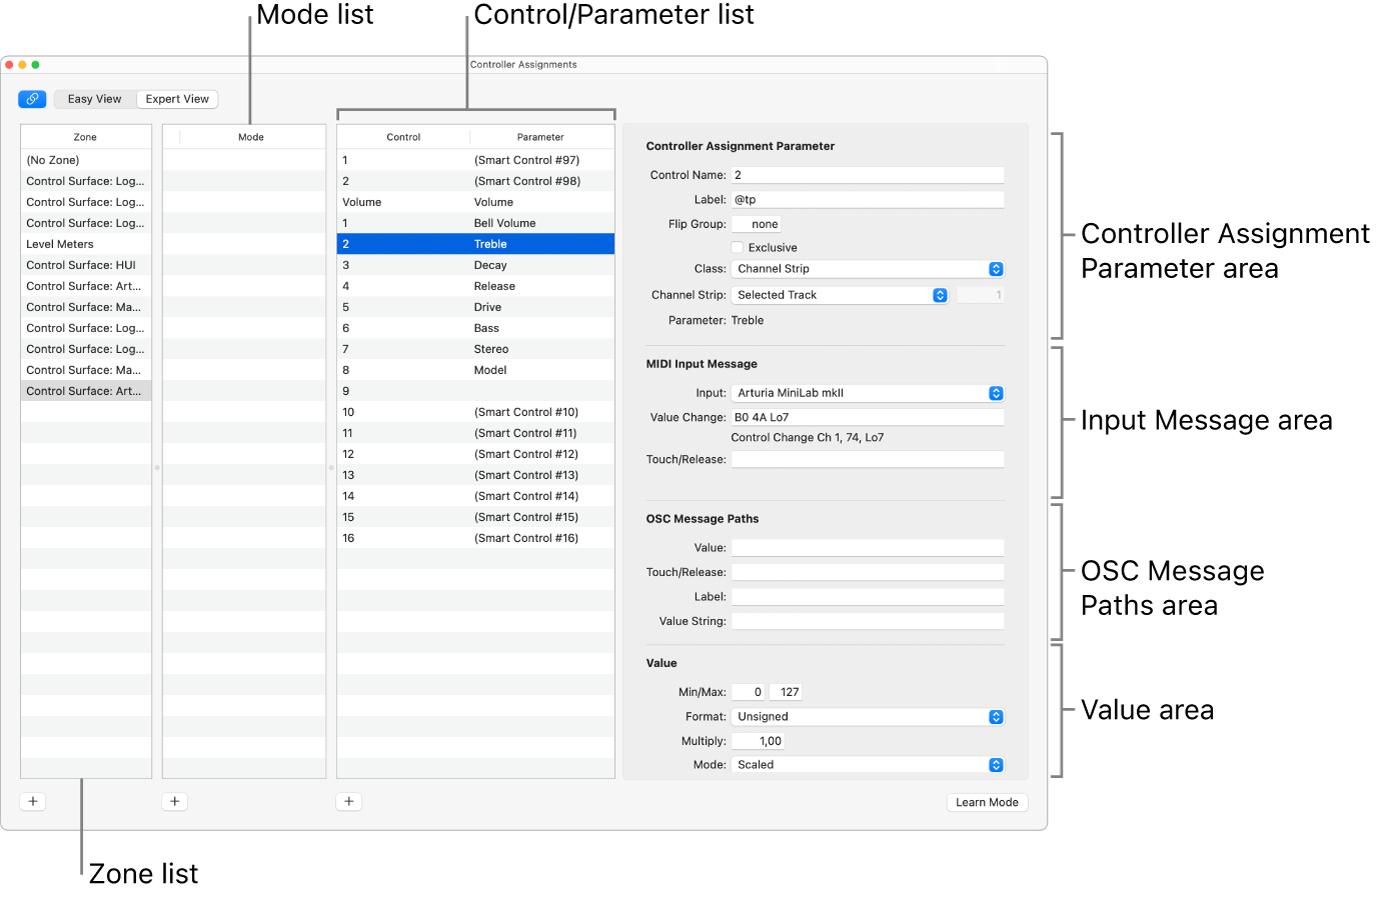 Figure. Controller Assignments window in expert view mode.